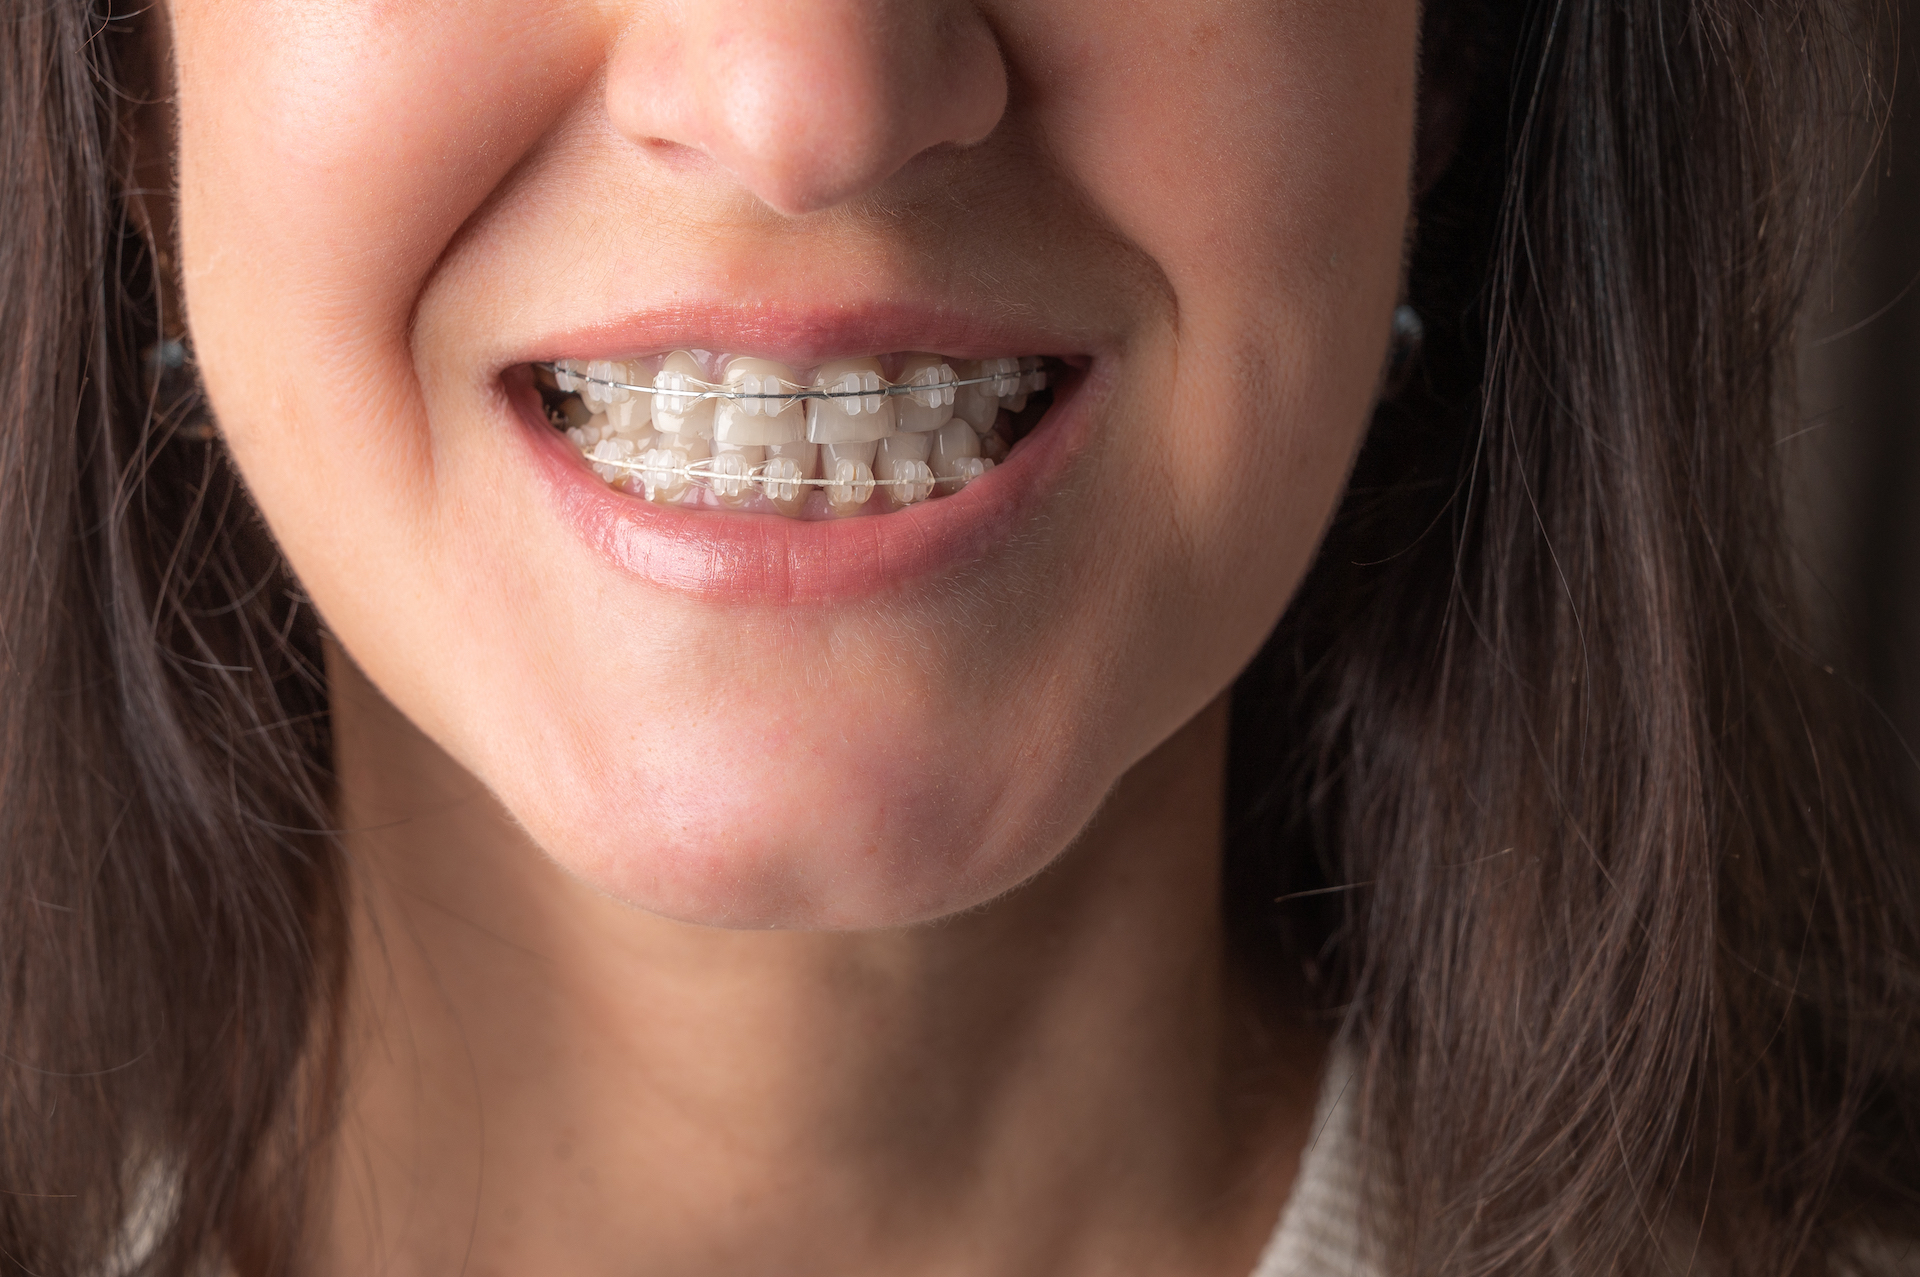 Woman looks teeth with braces. Dental care photo with orthodontic accessories. Close up